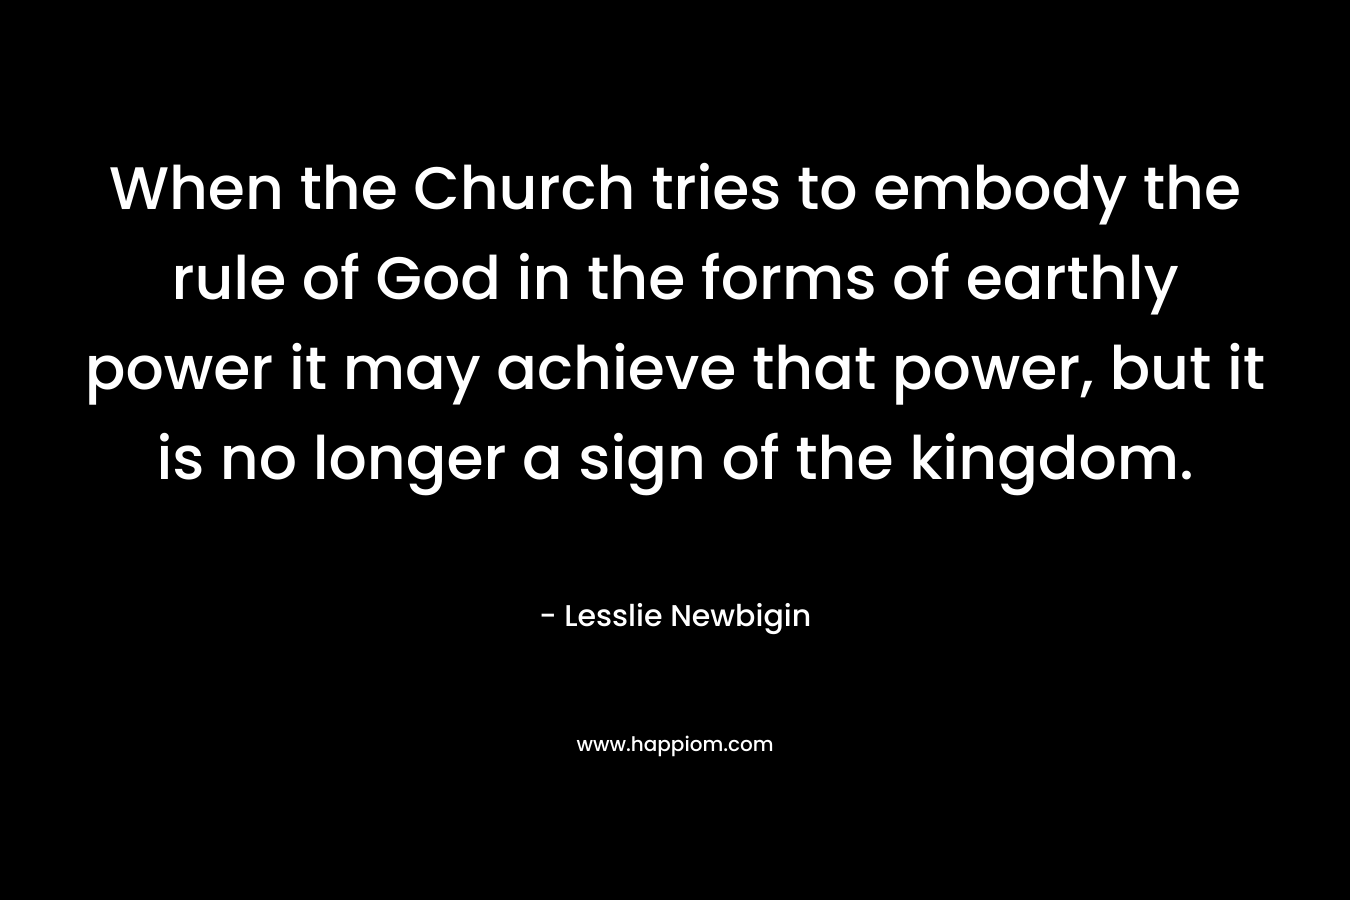 When the Church tries to embody the rule of God in the forms of earthly power it may achieve that power, but it is no longer a sign of the kingdom.